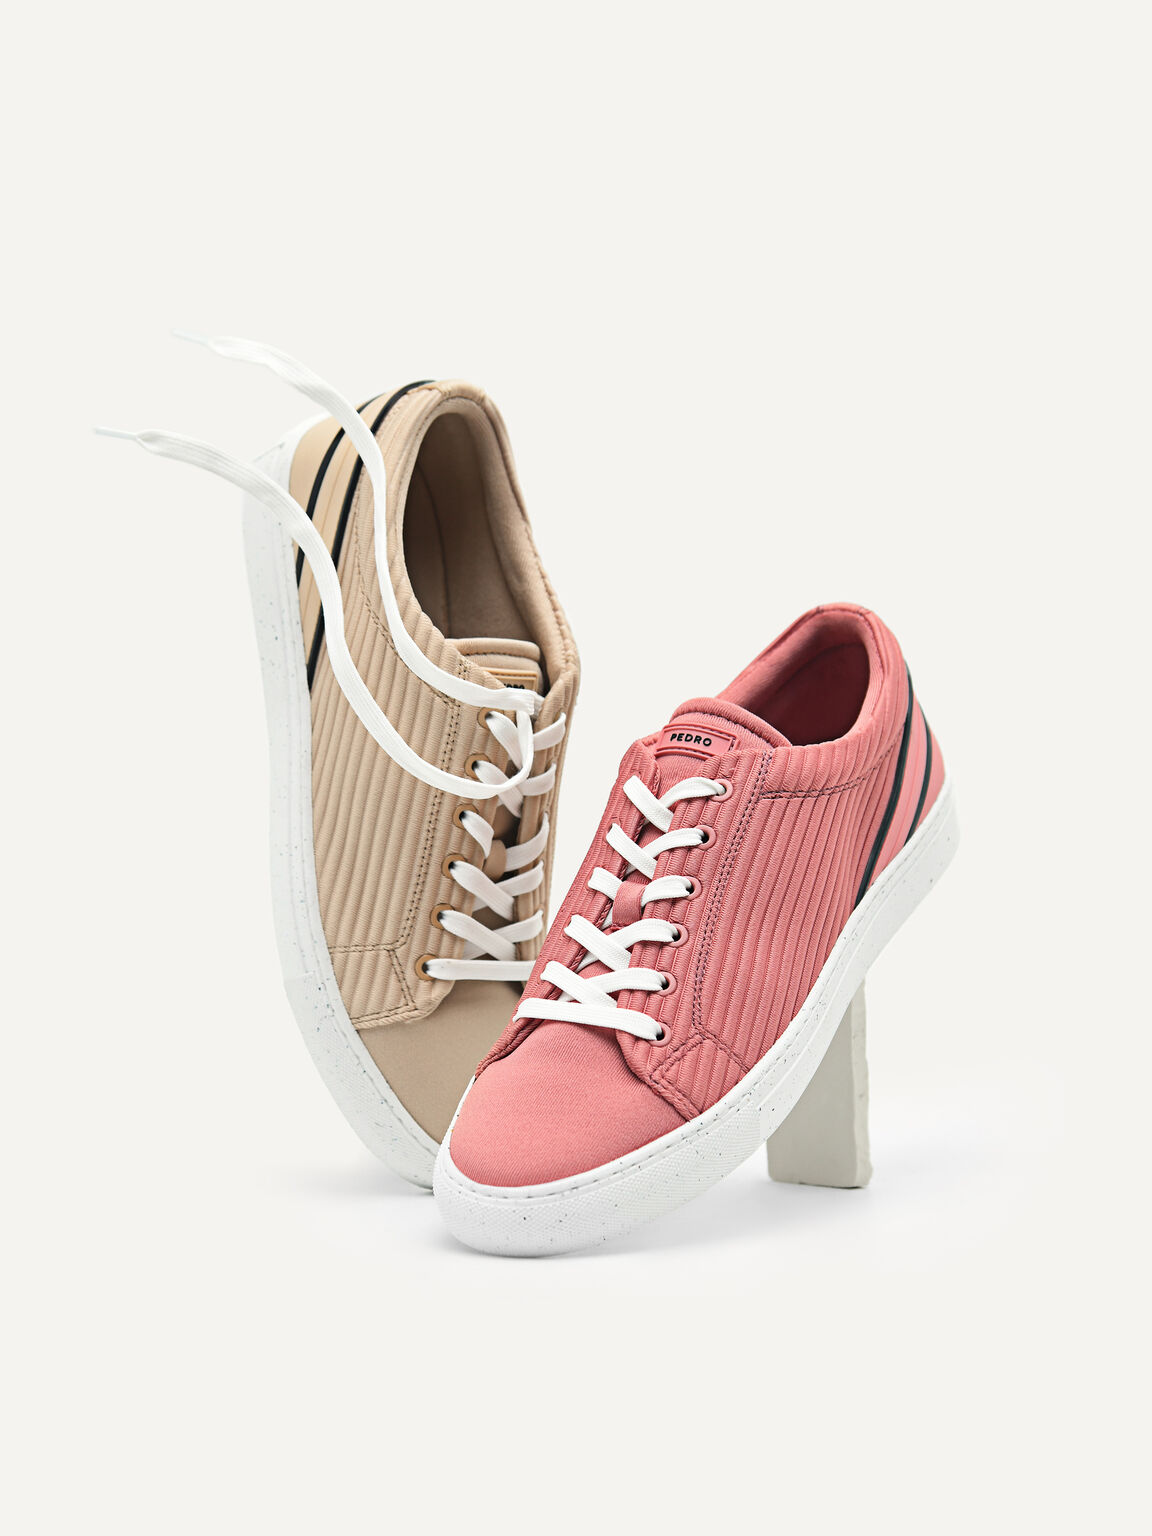 rePEDRO Pleated Sneakers, Nude